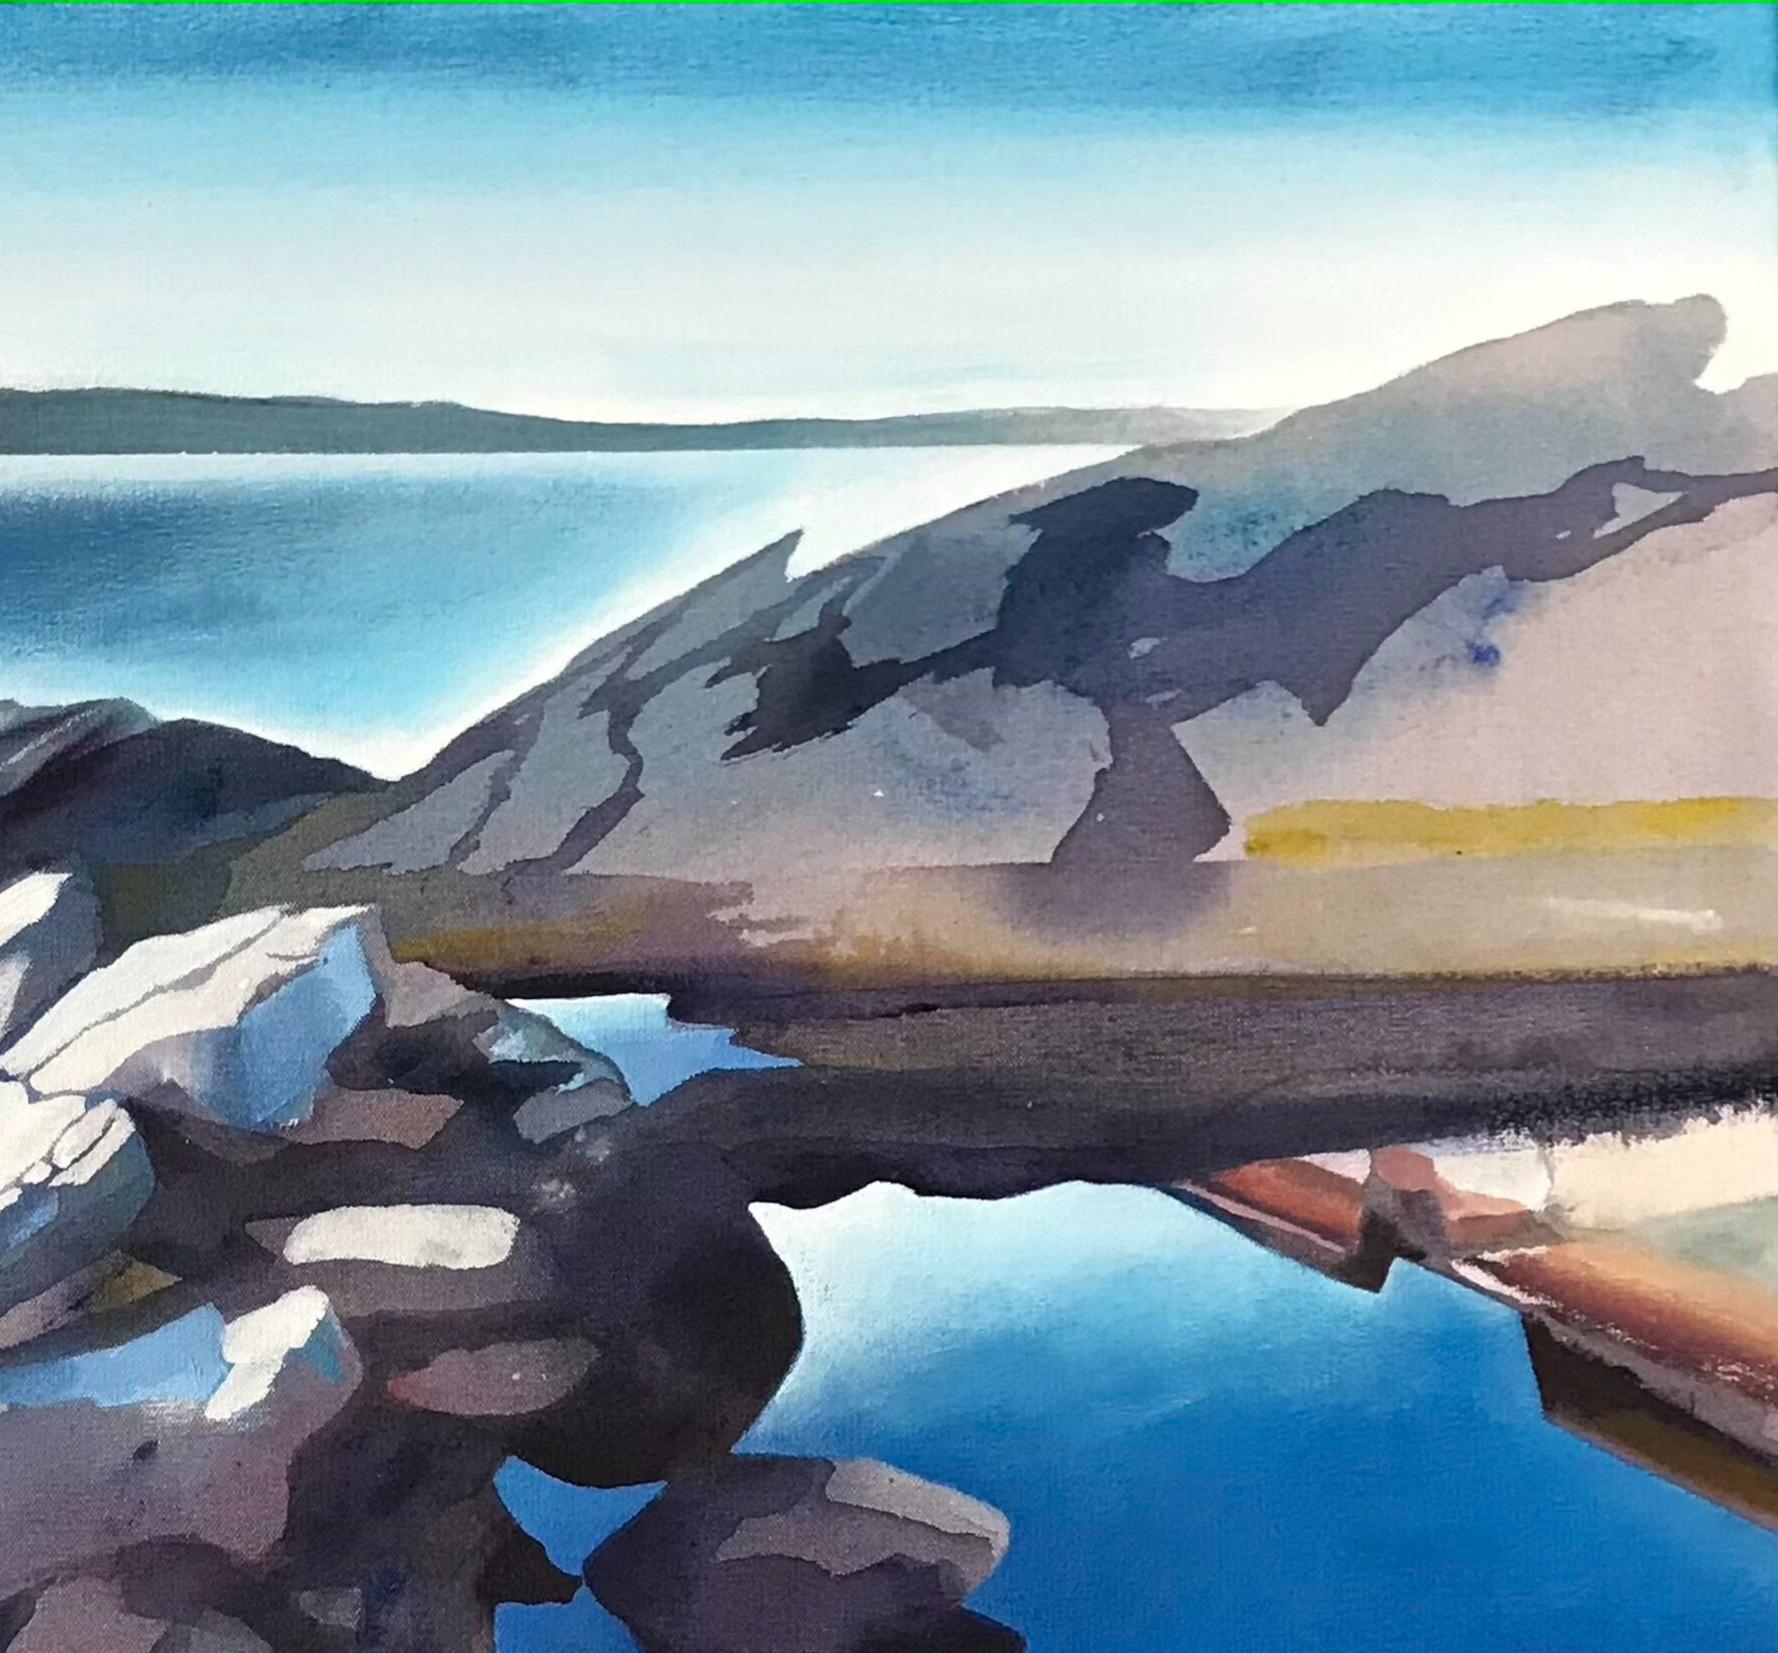 Dynamic Shapes - Liminal Rock-pools of Southern Norway: Acrylic on Canvas - Painting by Claire Smith